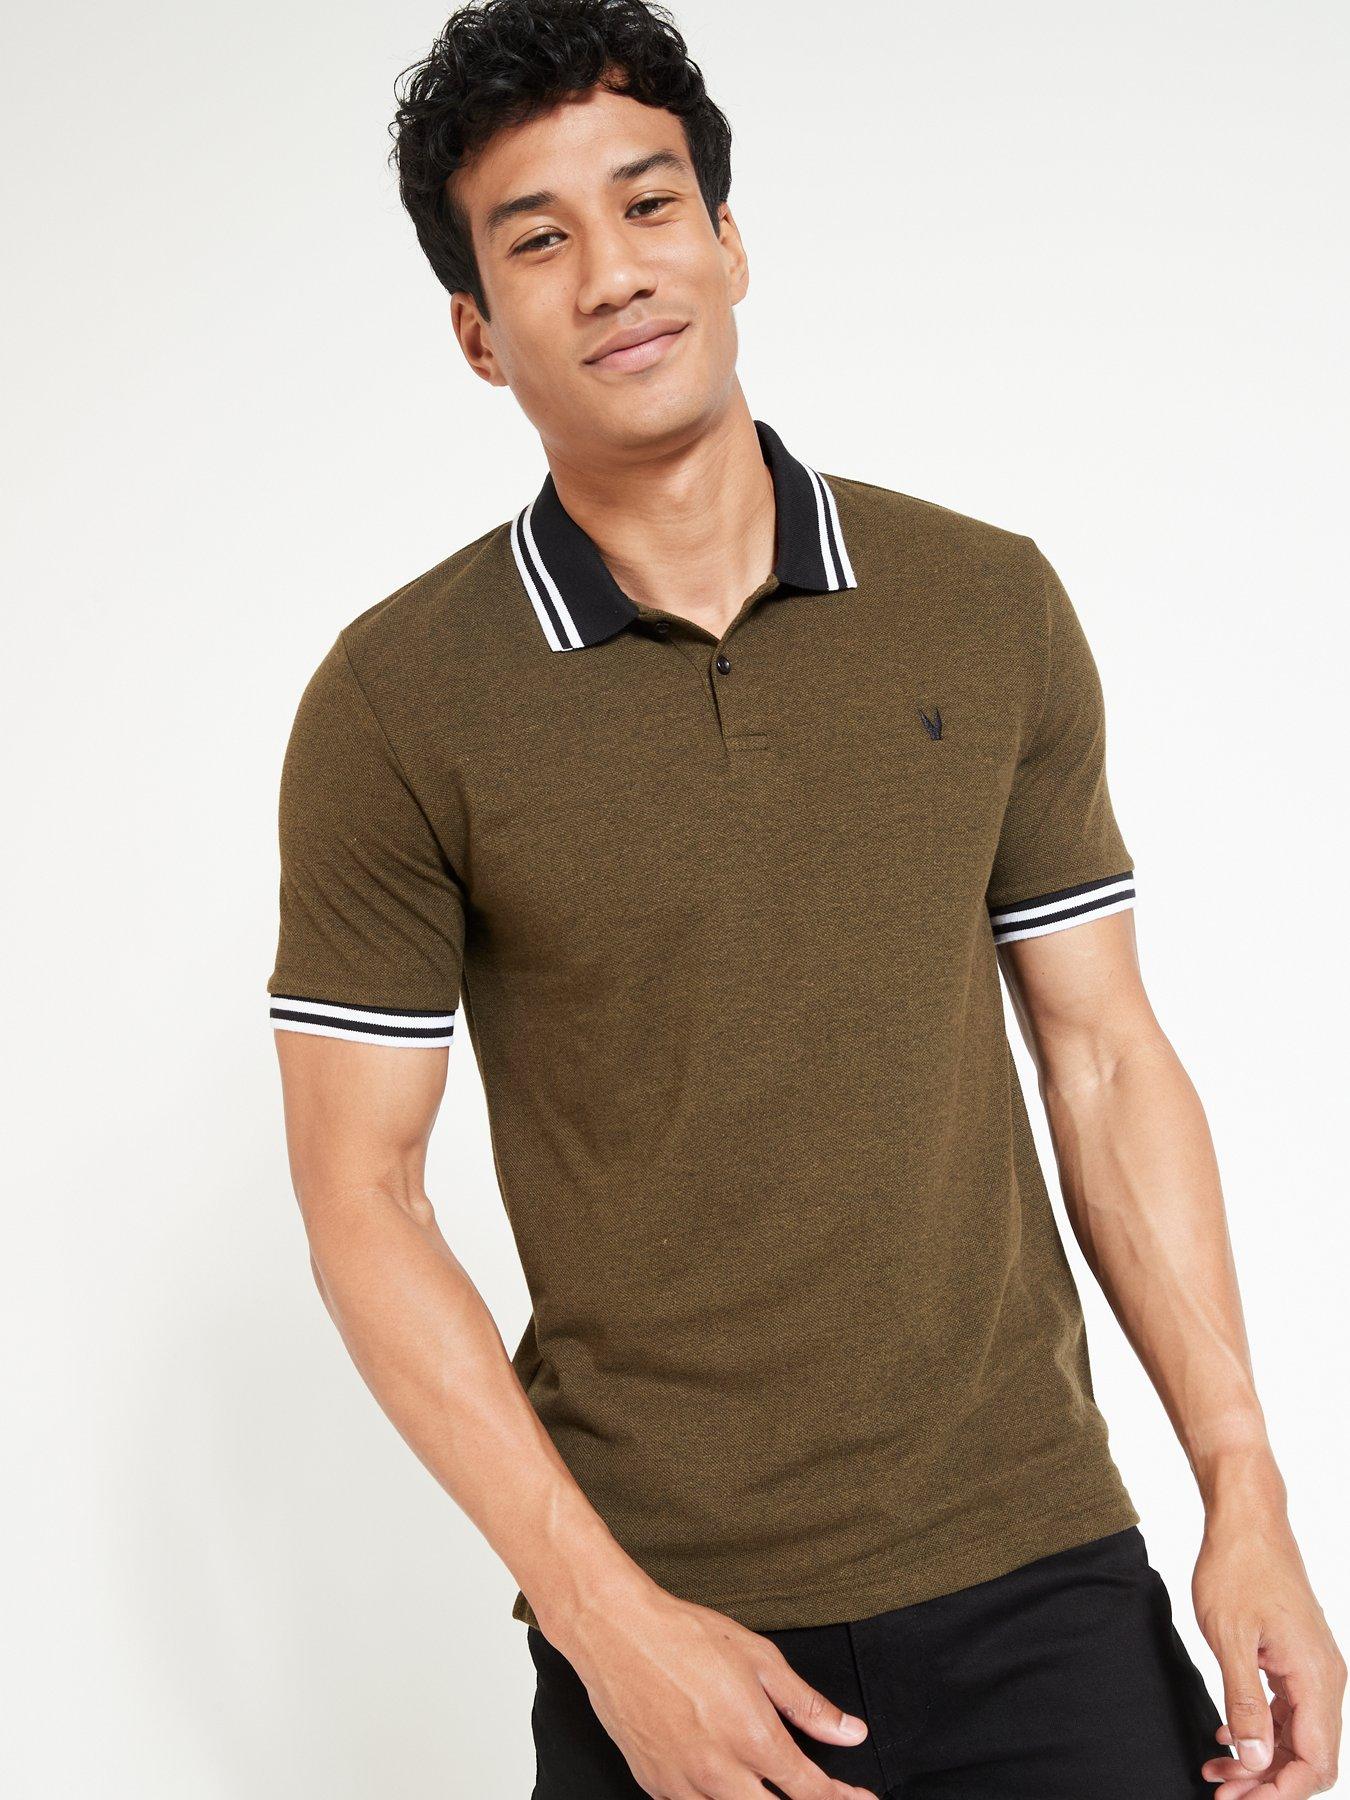 Mens Clothing T-shirts Polo shirts for Men Fred Perry Twin Tipped Shirt in Dark Sand Natural 